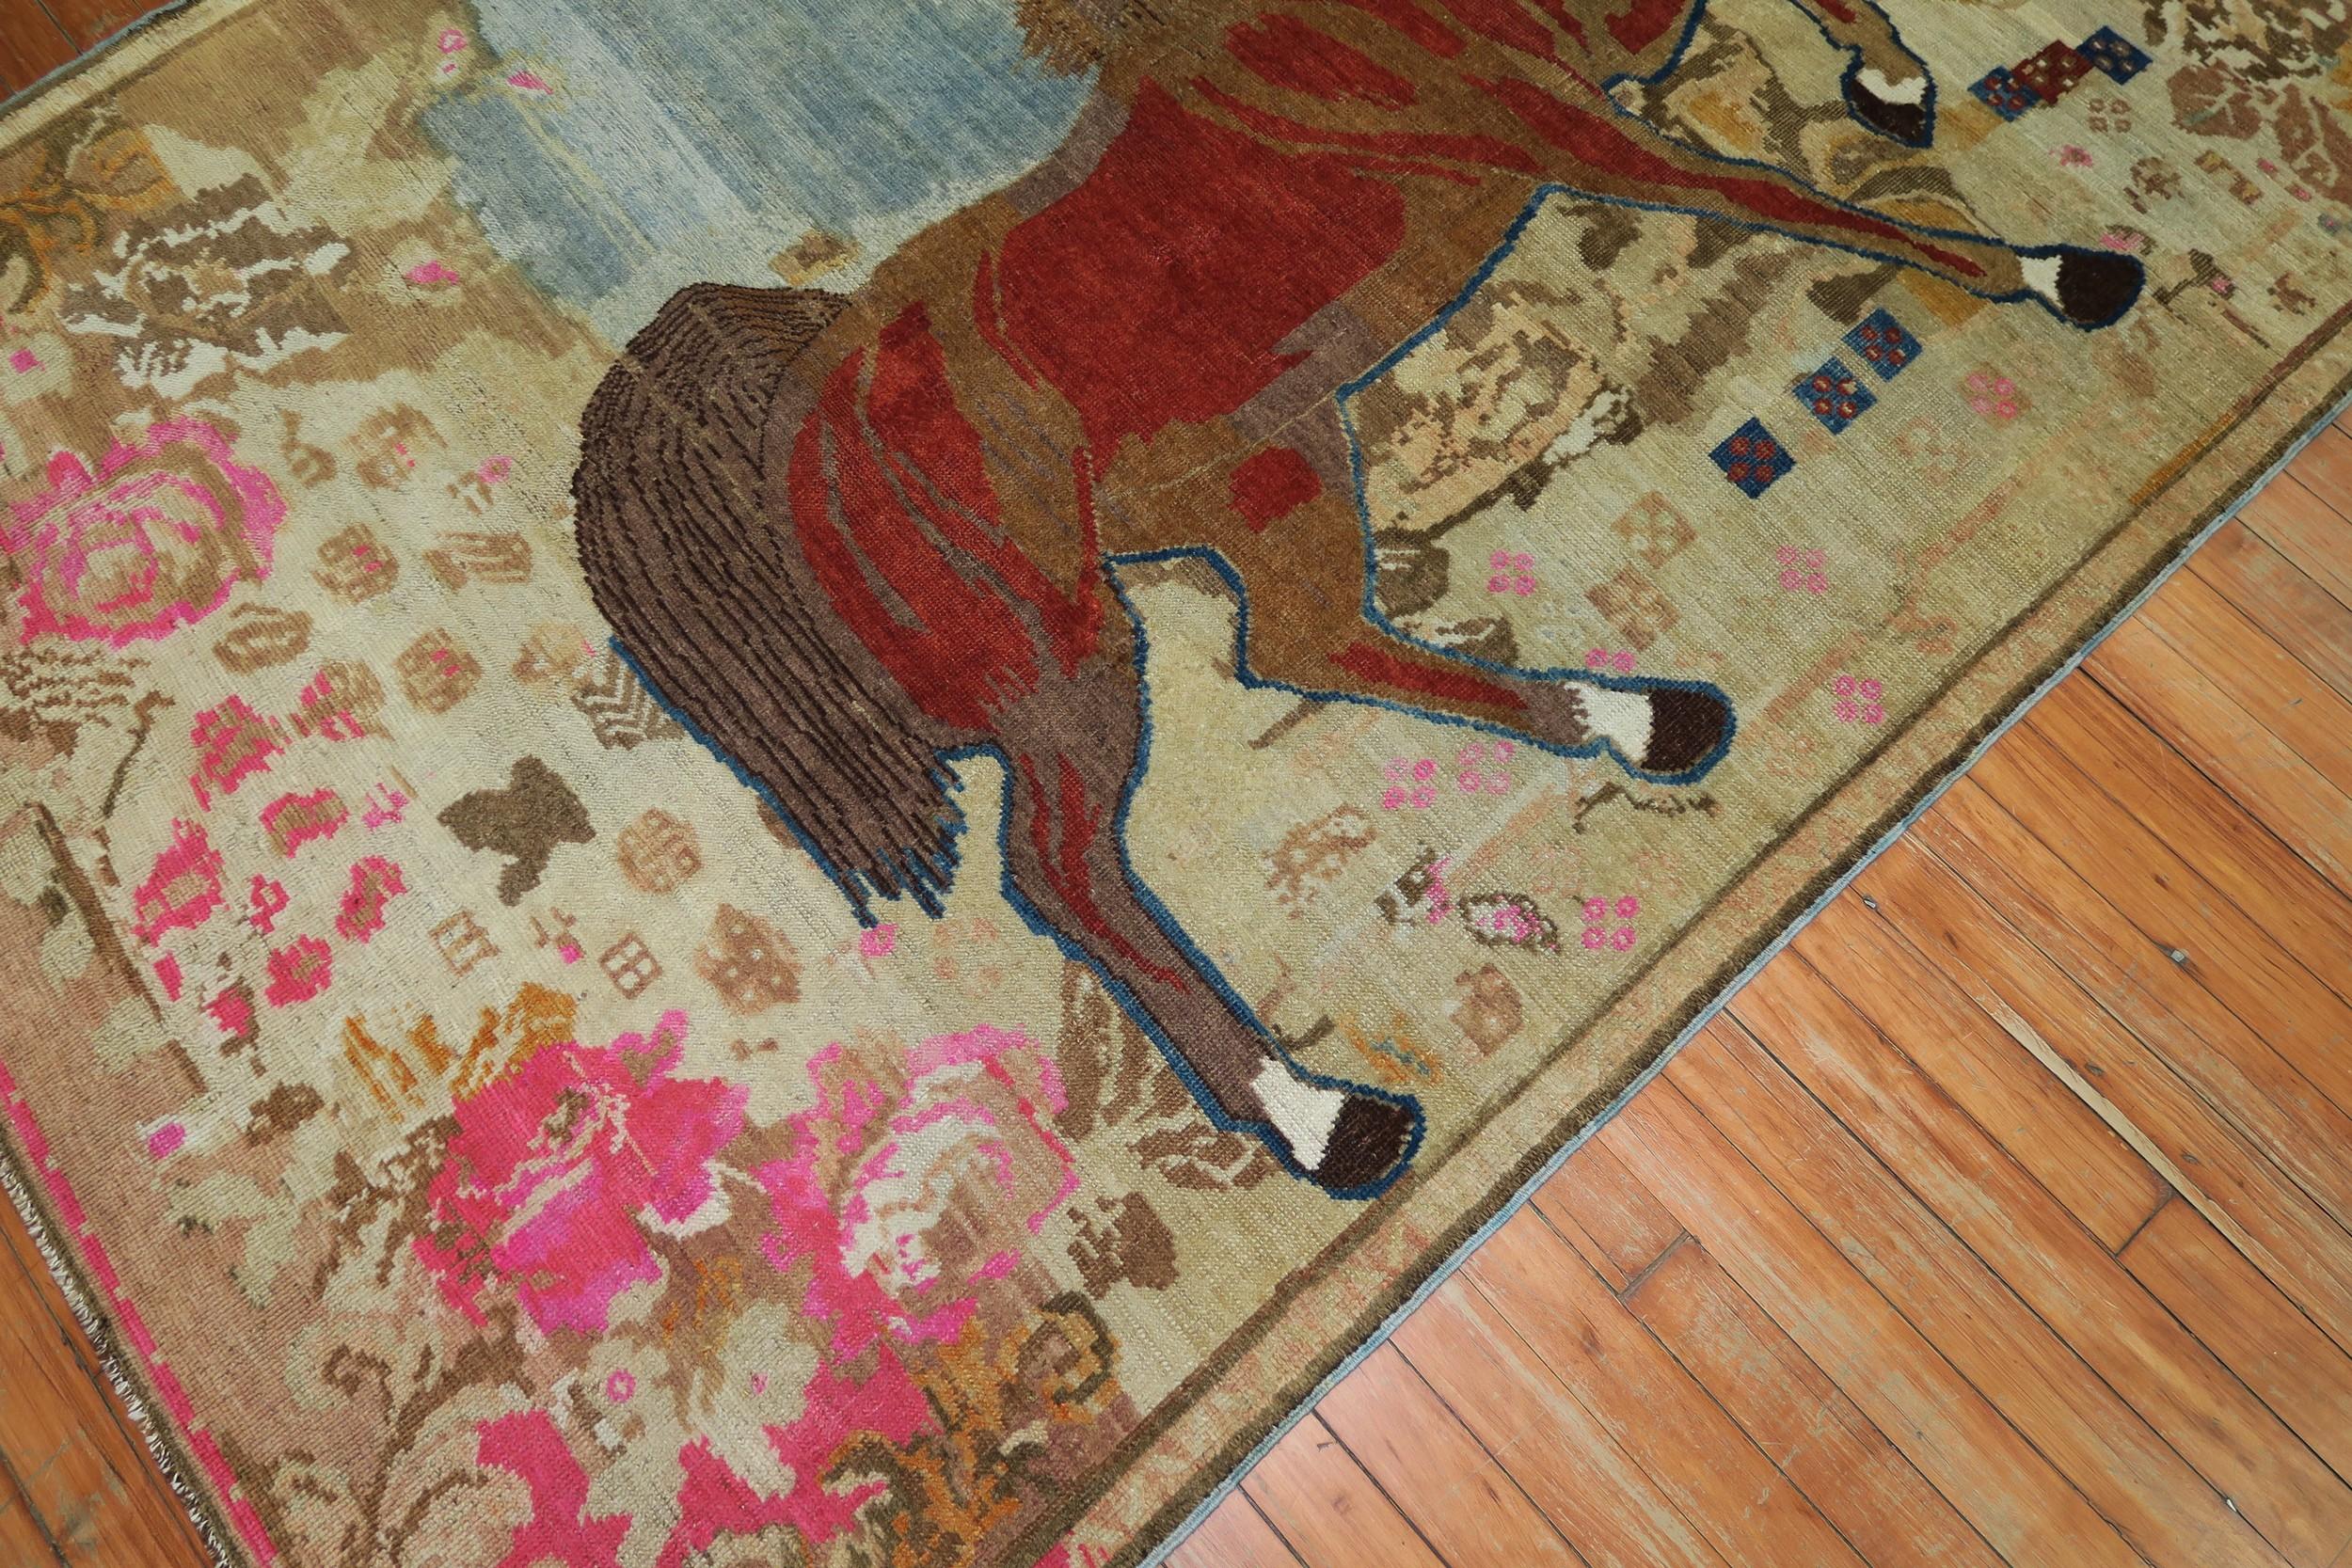 Hand-Woven Antique Russian Brown Horse 20th Century Pictorial Wool Decorative Rug For Sale